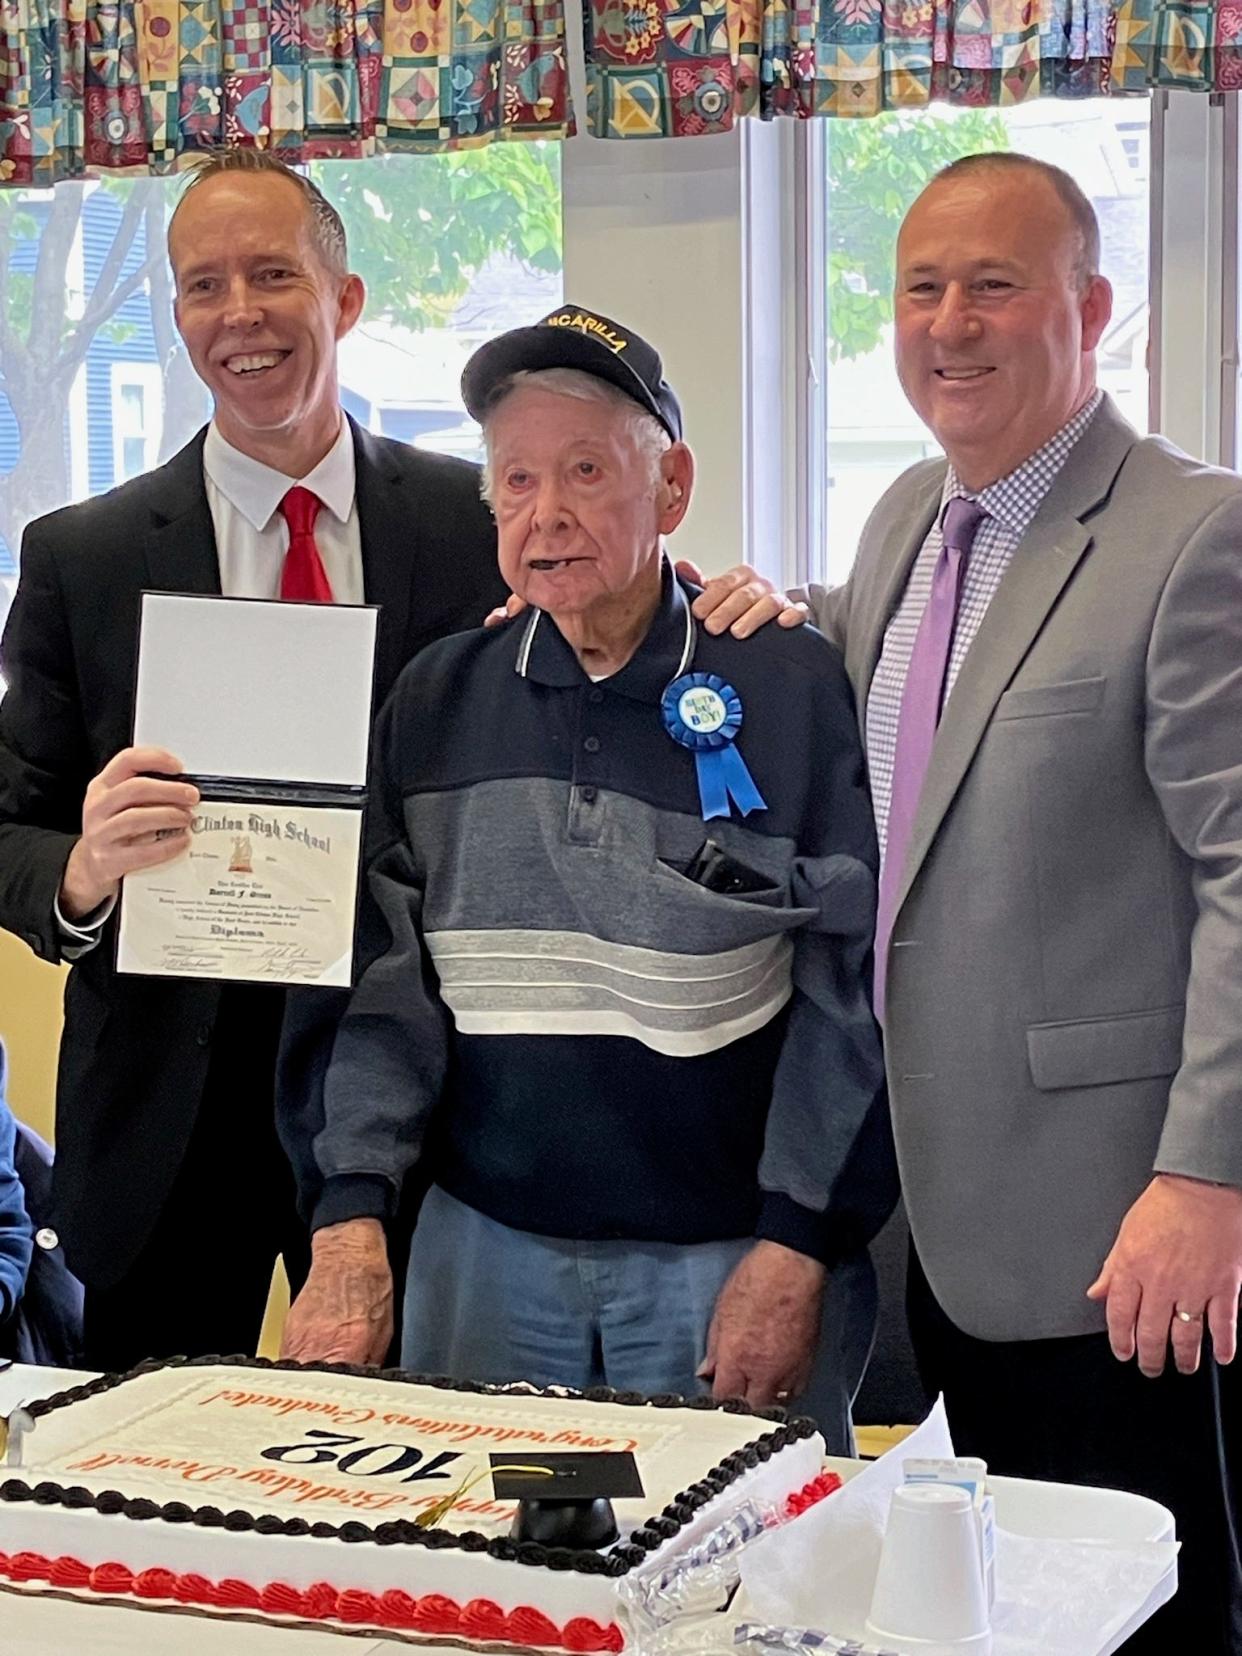 Patrick Adkins, Superintendent of Schools, presents Darrel Gress, center, with his Port Clinton High School Diploma on his 102nd Birthday Celebration along with PCHS Principal Gary Steyer.